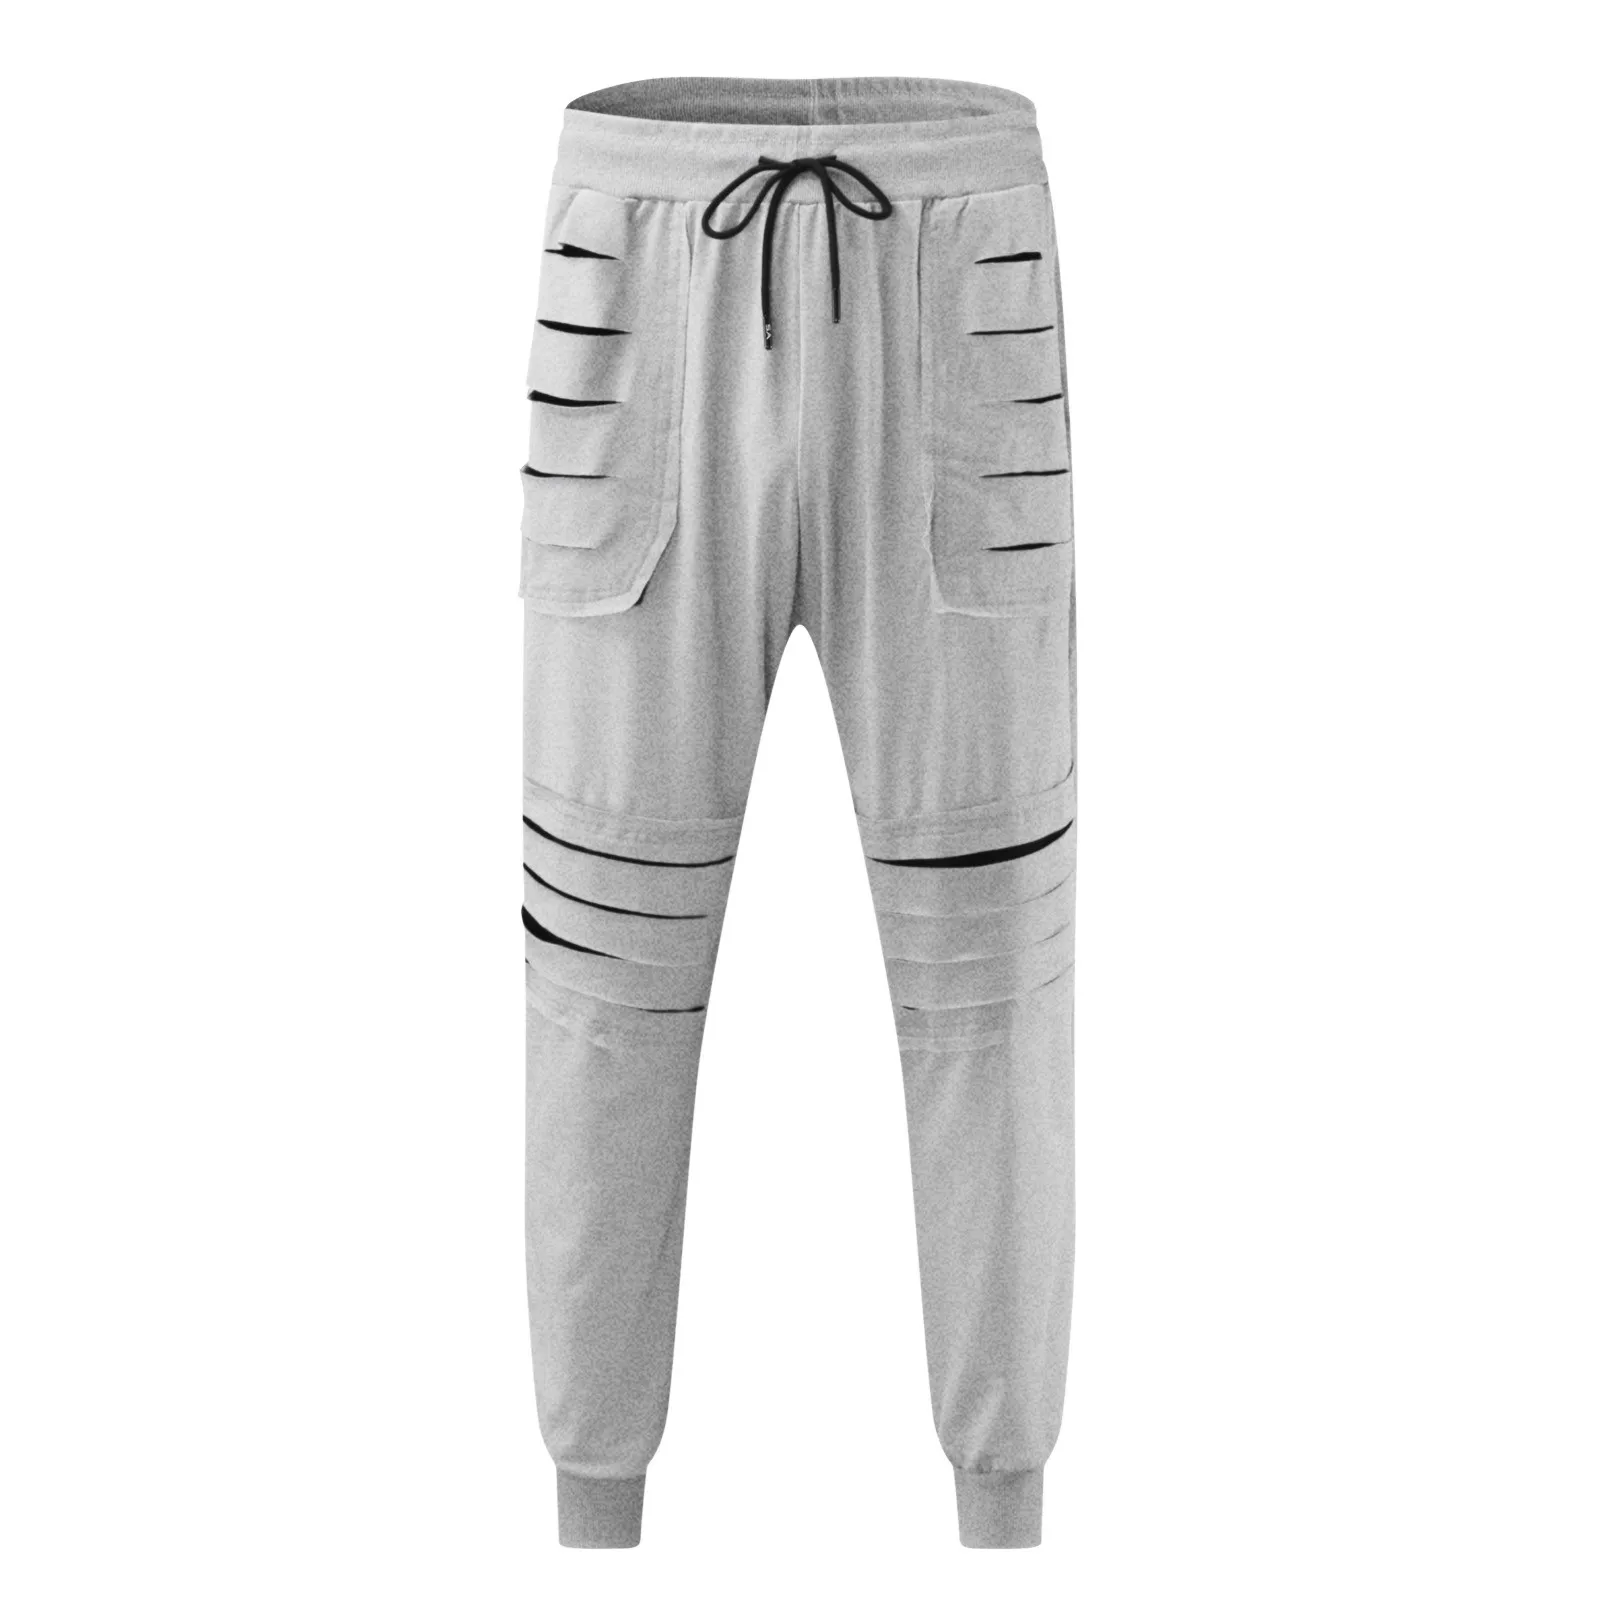 Men's Sports Tracksuit Pants Sweatpants Loose Ripped Trousers Casual Jogging Street Pants With Pockets Streetwear gym joggers for men